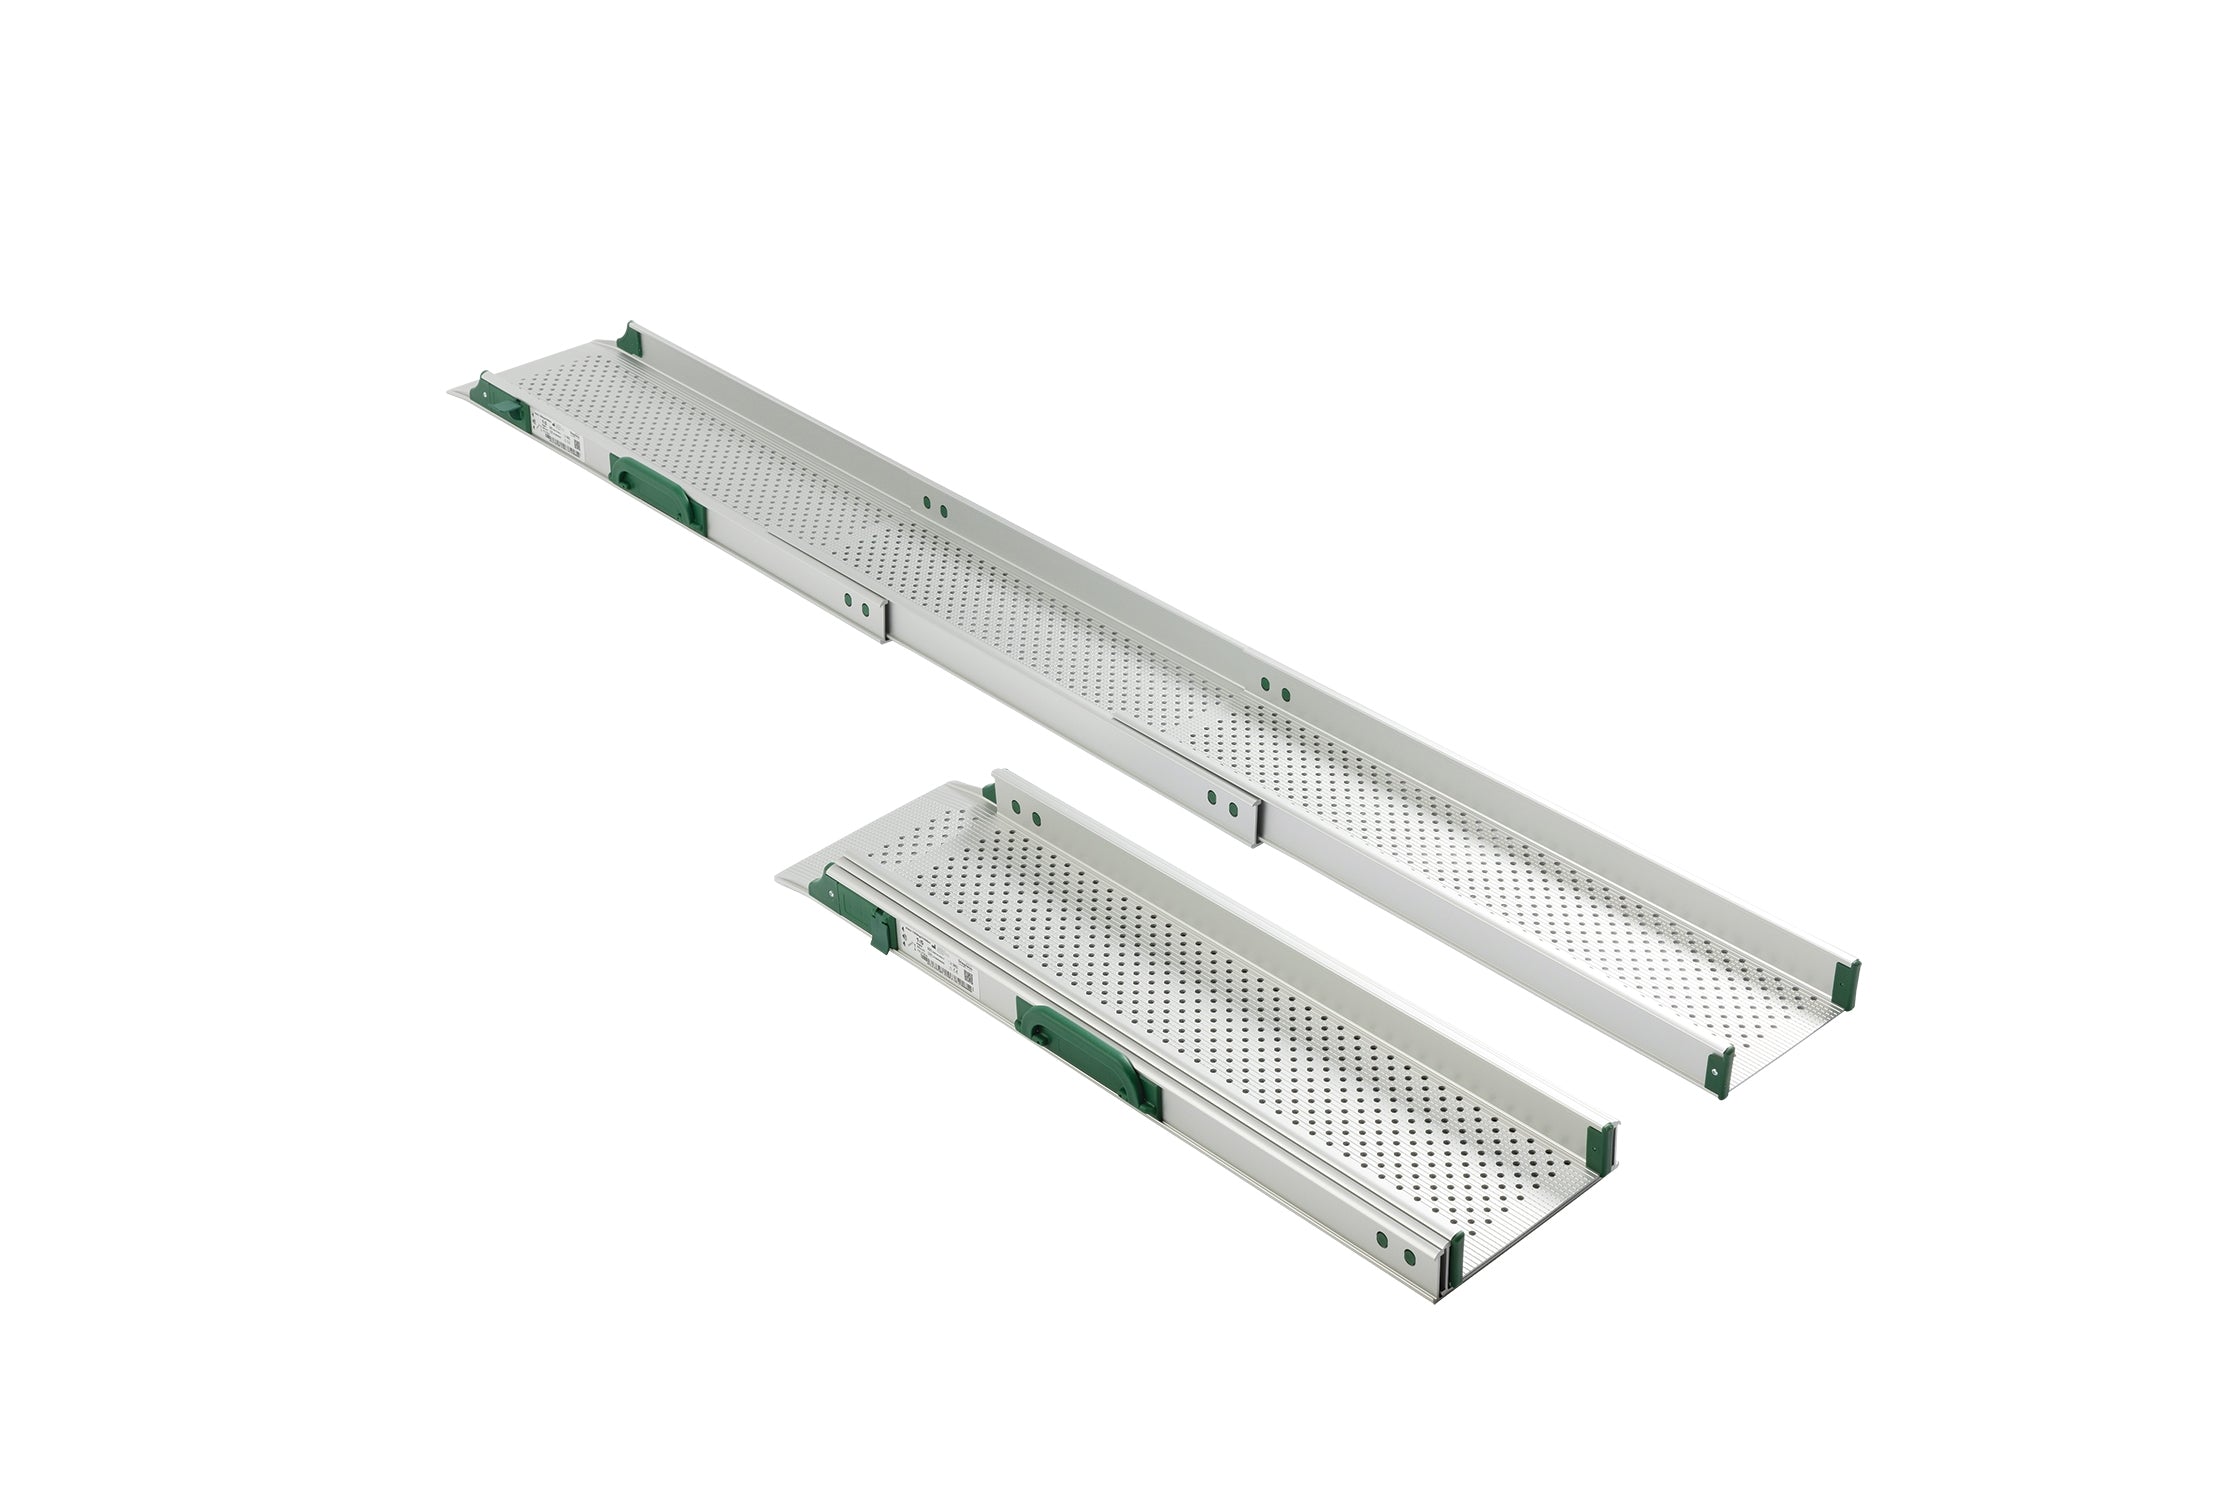 Stepless Portable Telescopic Ramps Ramp Guldmann Stepless 75 7/8 - 34 1/4 Inches (200cm; 3 parts)  